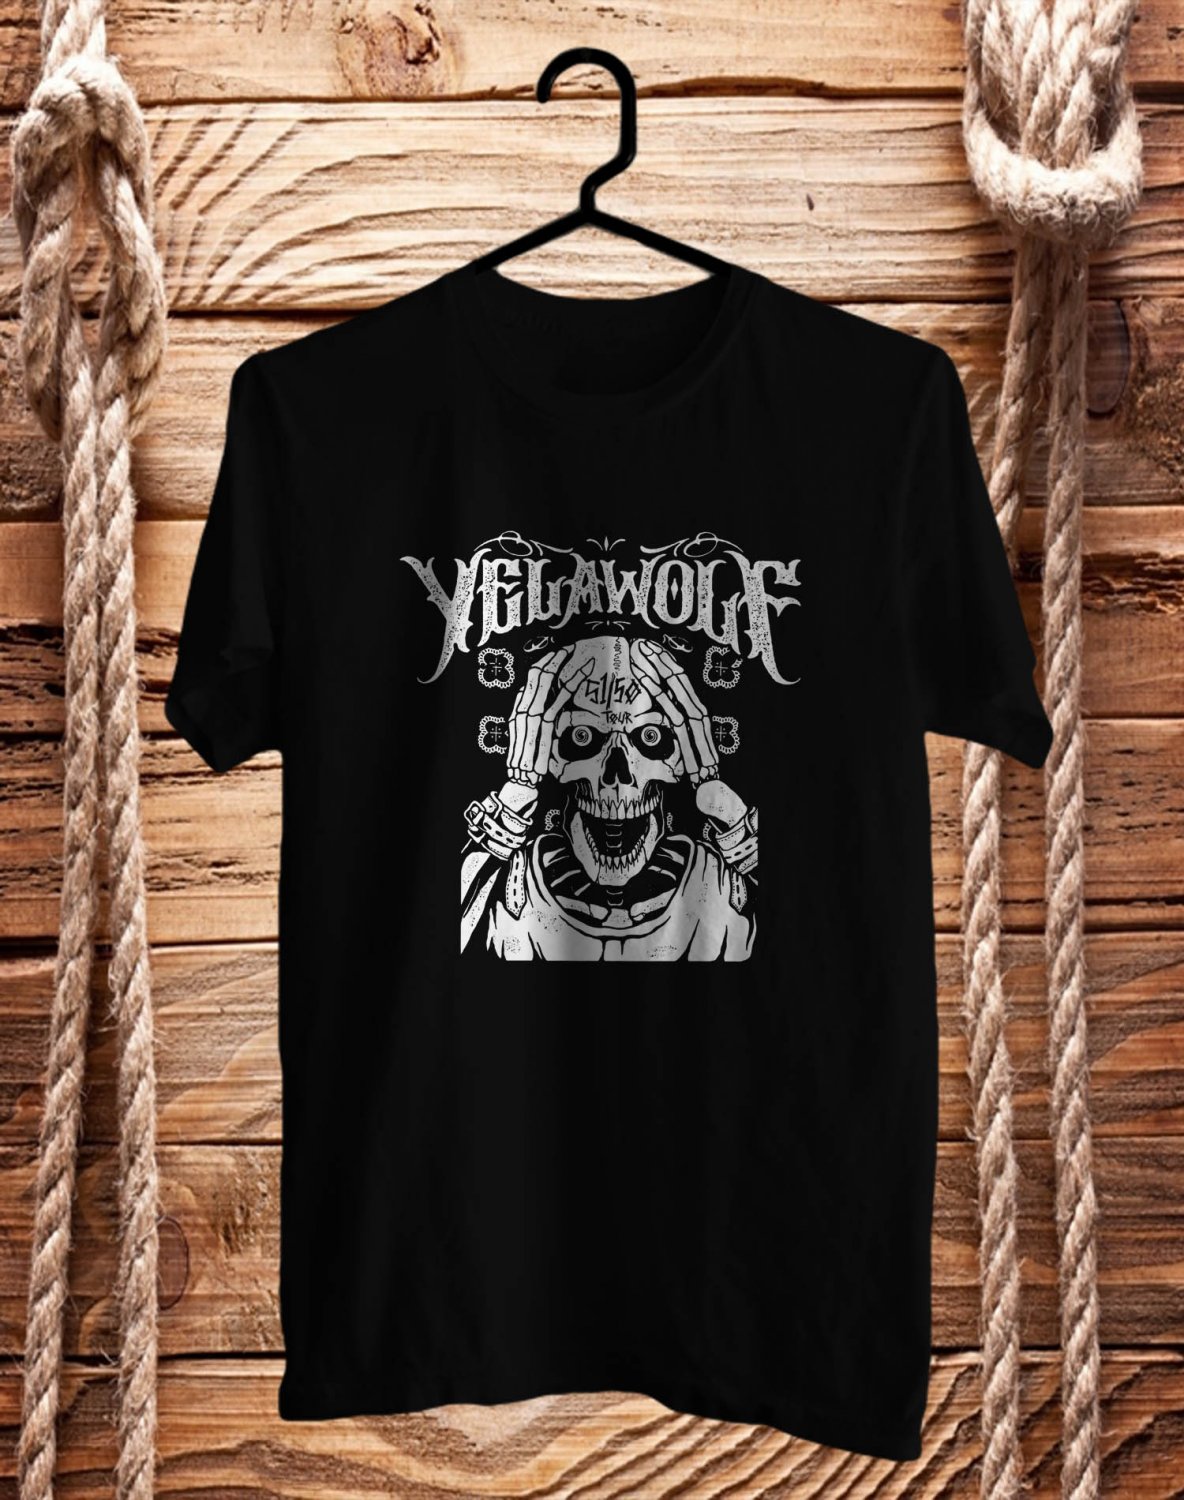 Yelawolf 51/50 Tour 2017 Black Tee's Front Side by Complexart z2